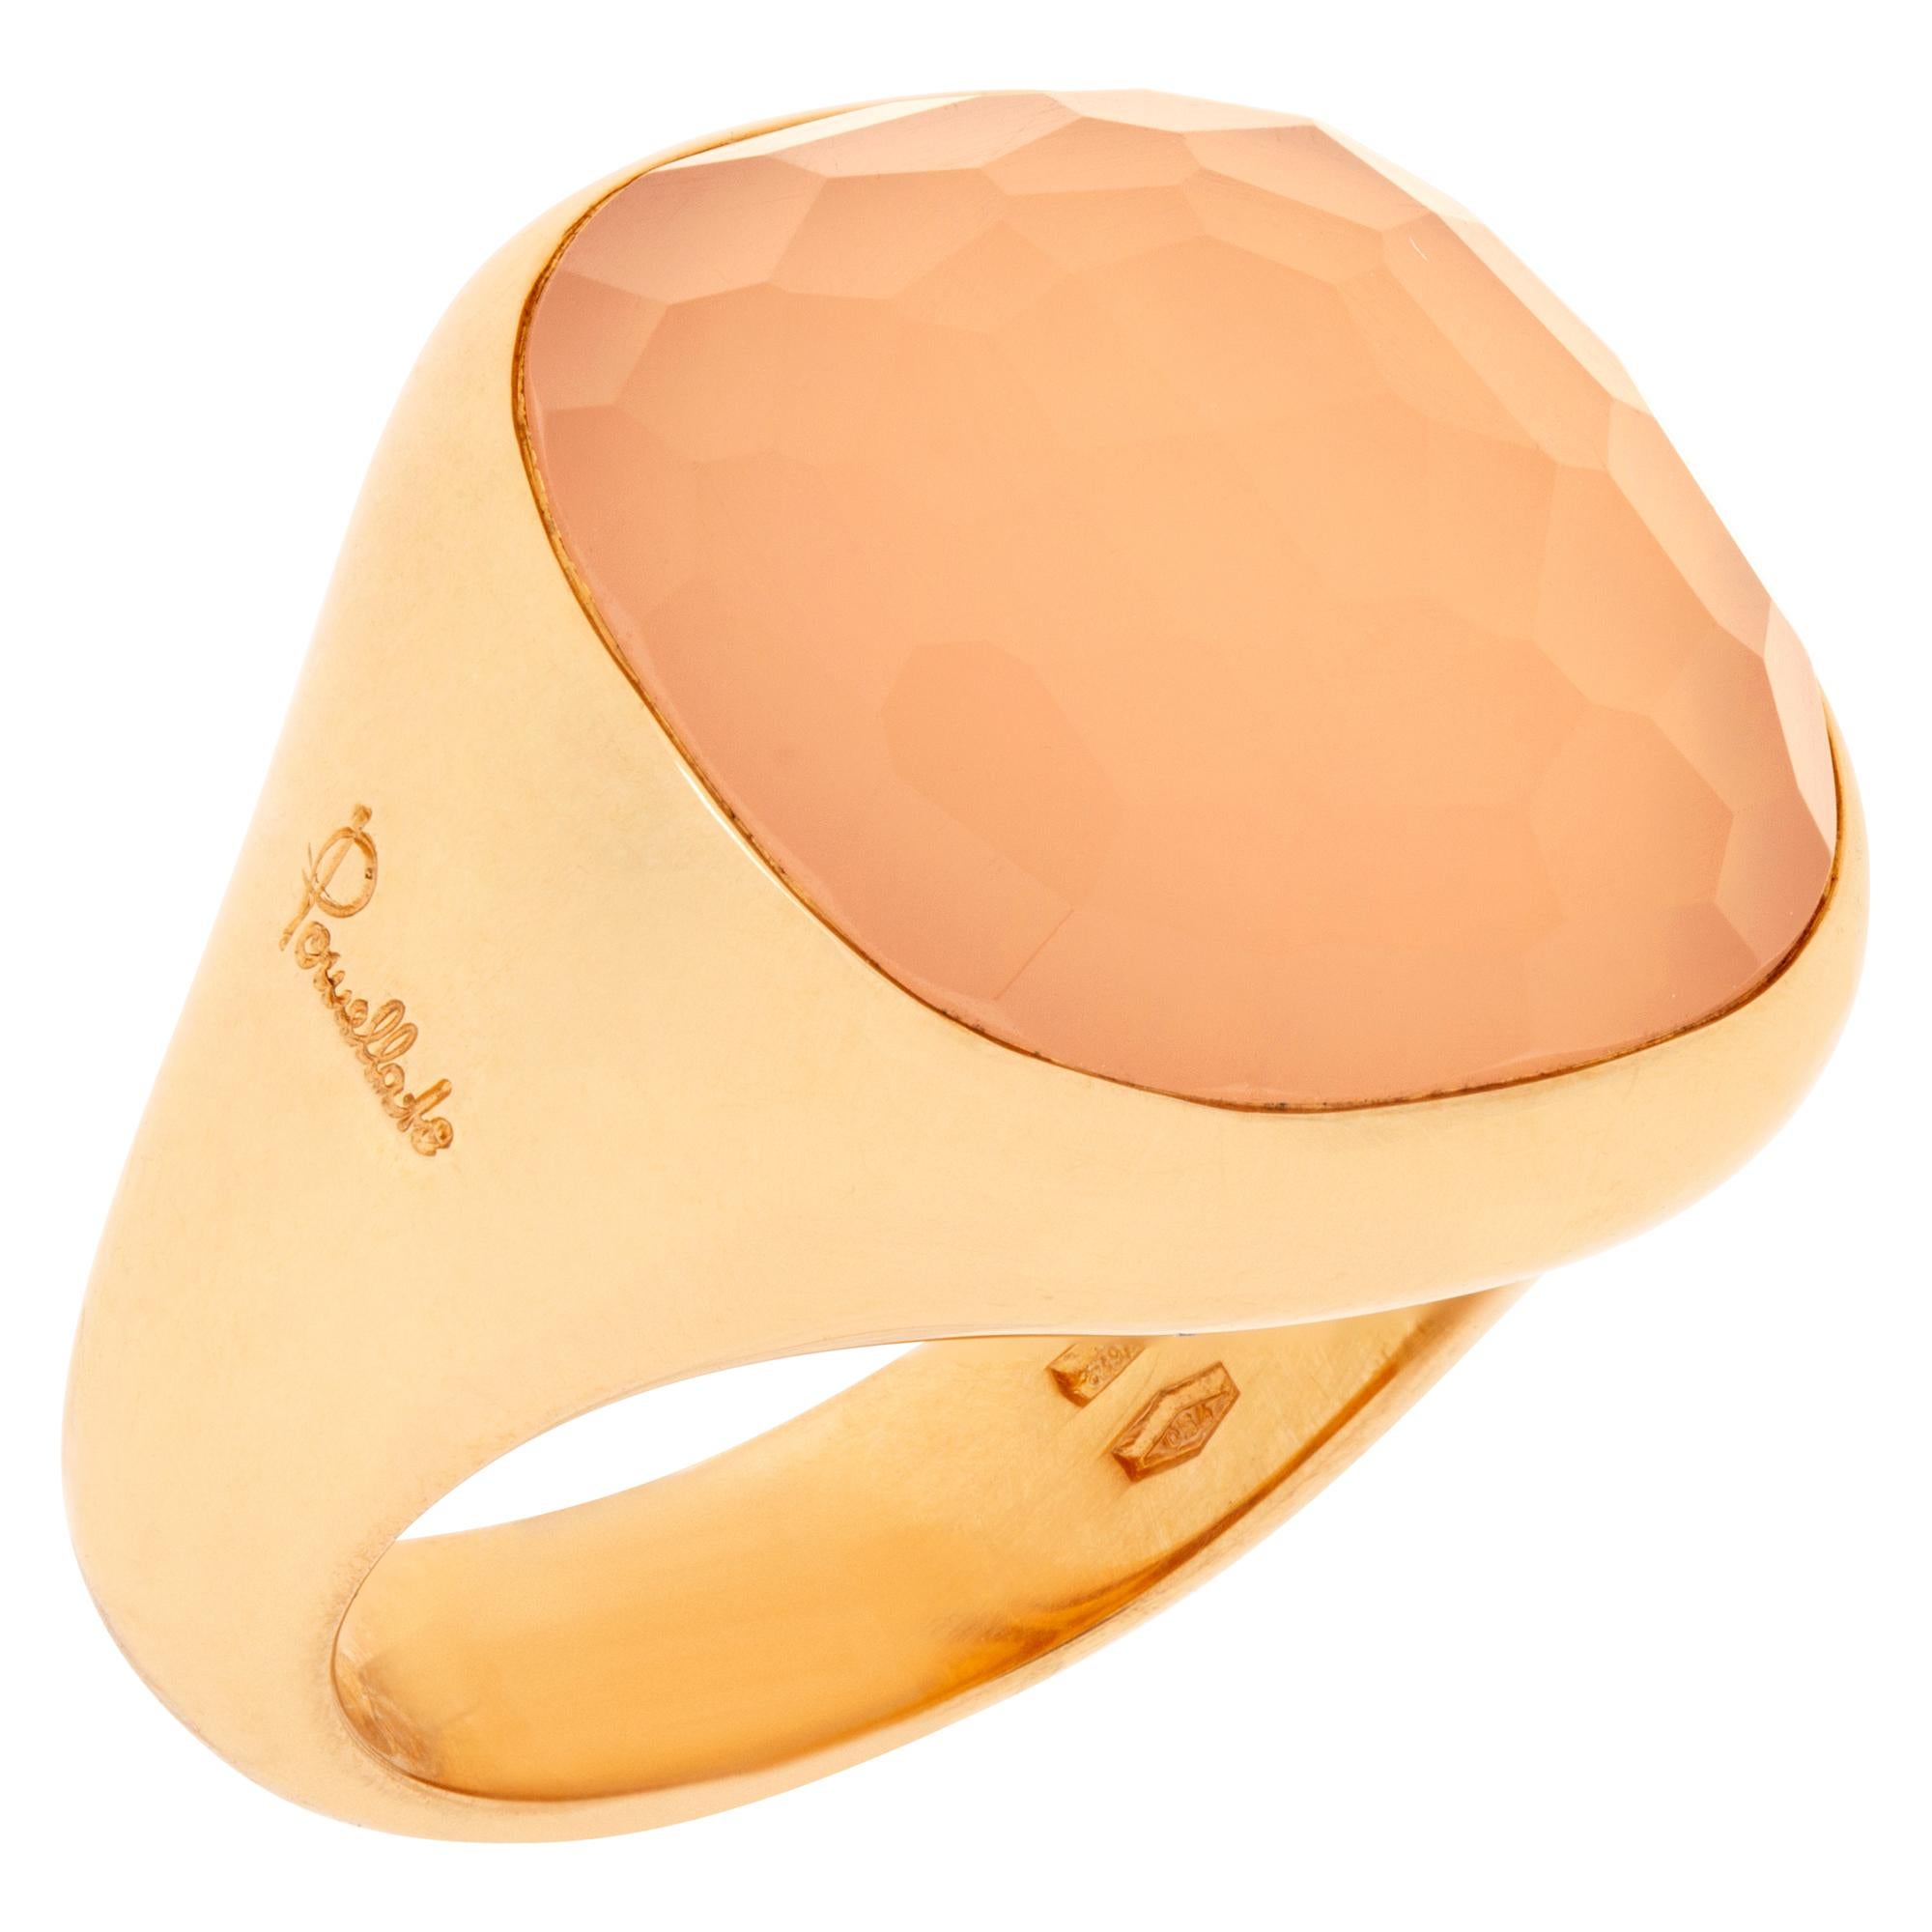 Pomellato rose quartz ring with 2 diamonds in 18k rose gold. Size 6.5

This Pomellato ring is currently size 6.5 and some items can be sized up or down, please ask! It weighs 10.4 pennyweights and is 18k rose gold.